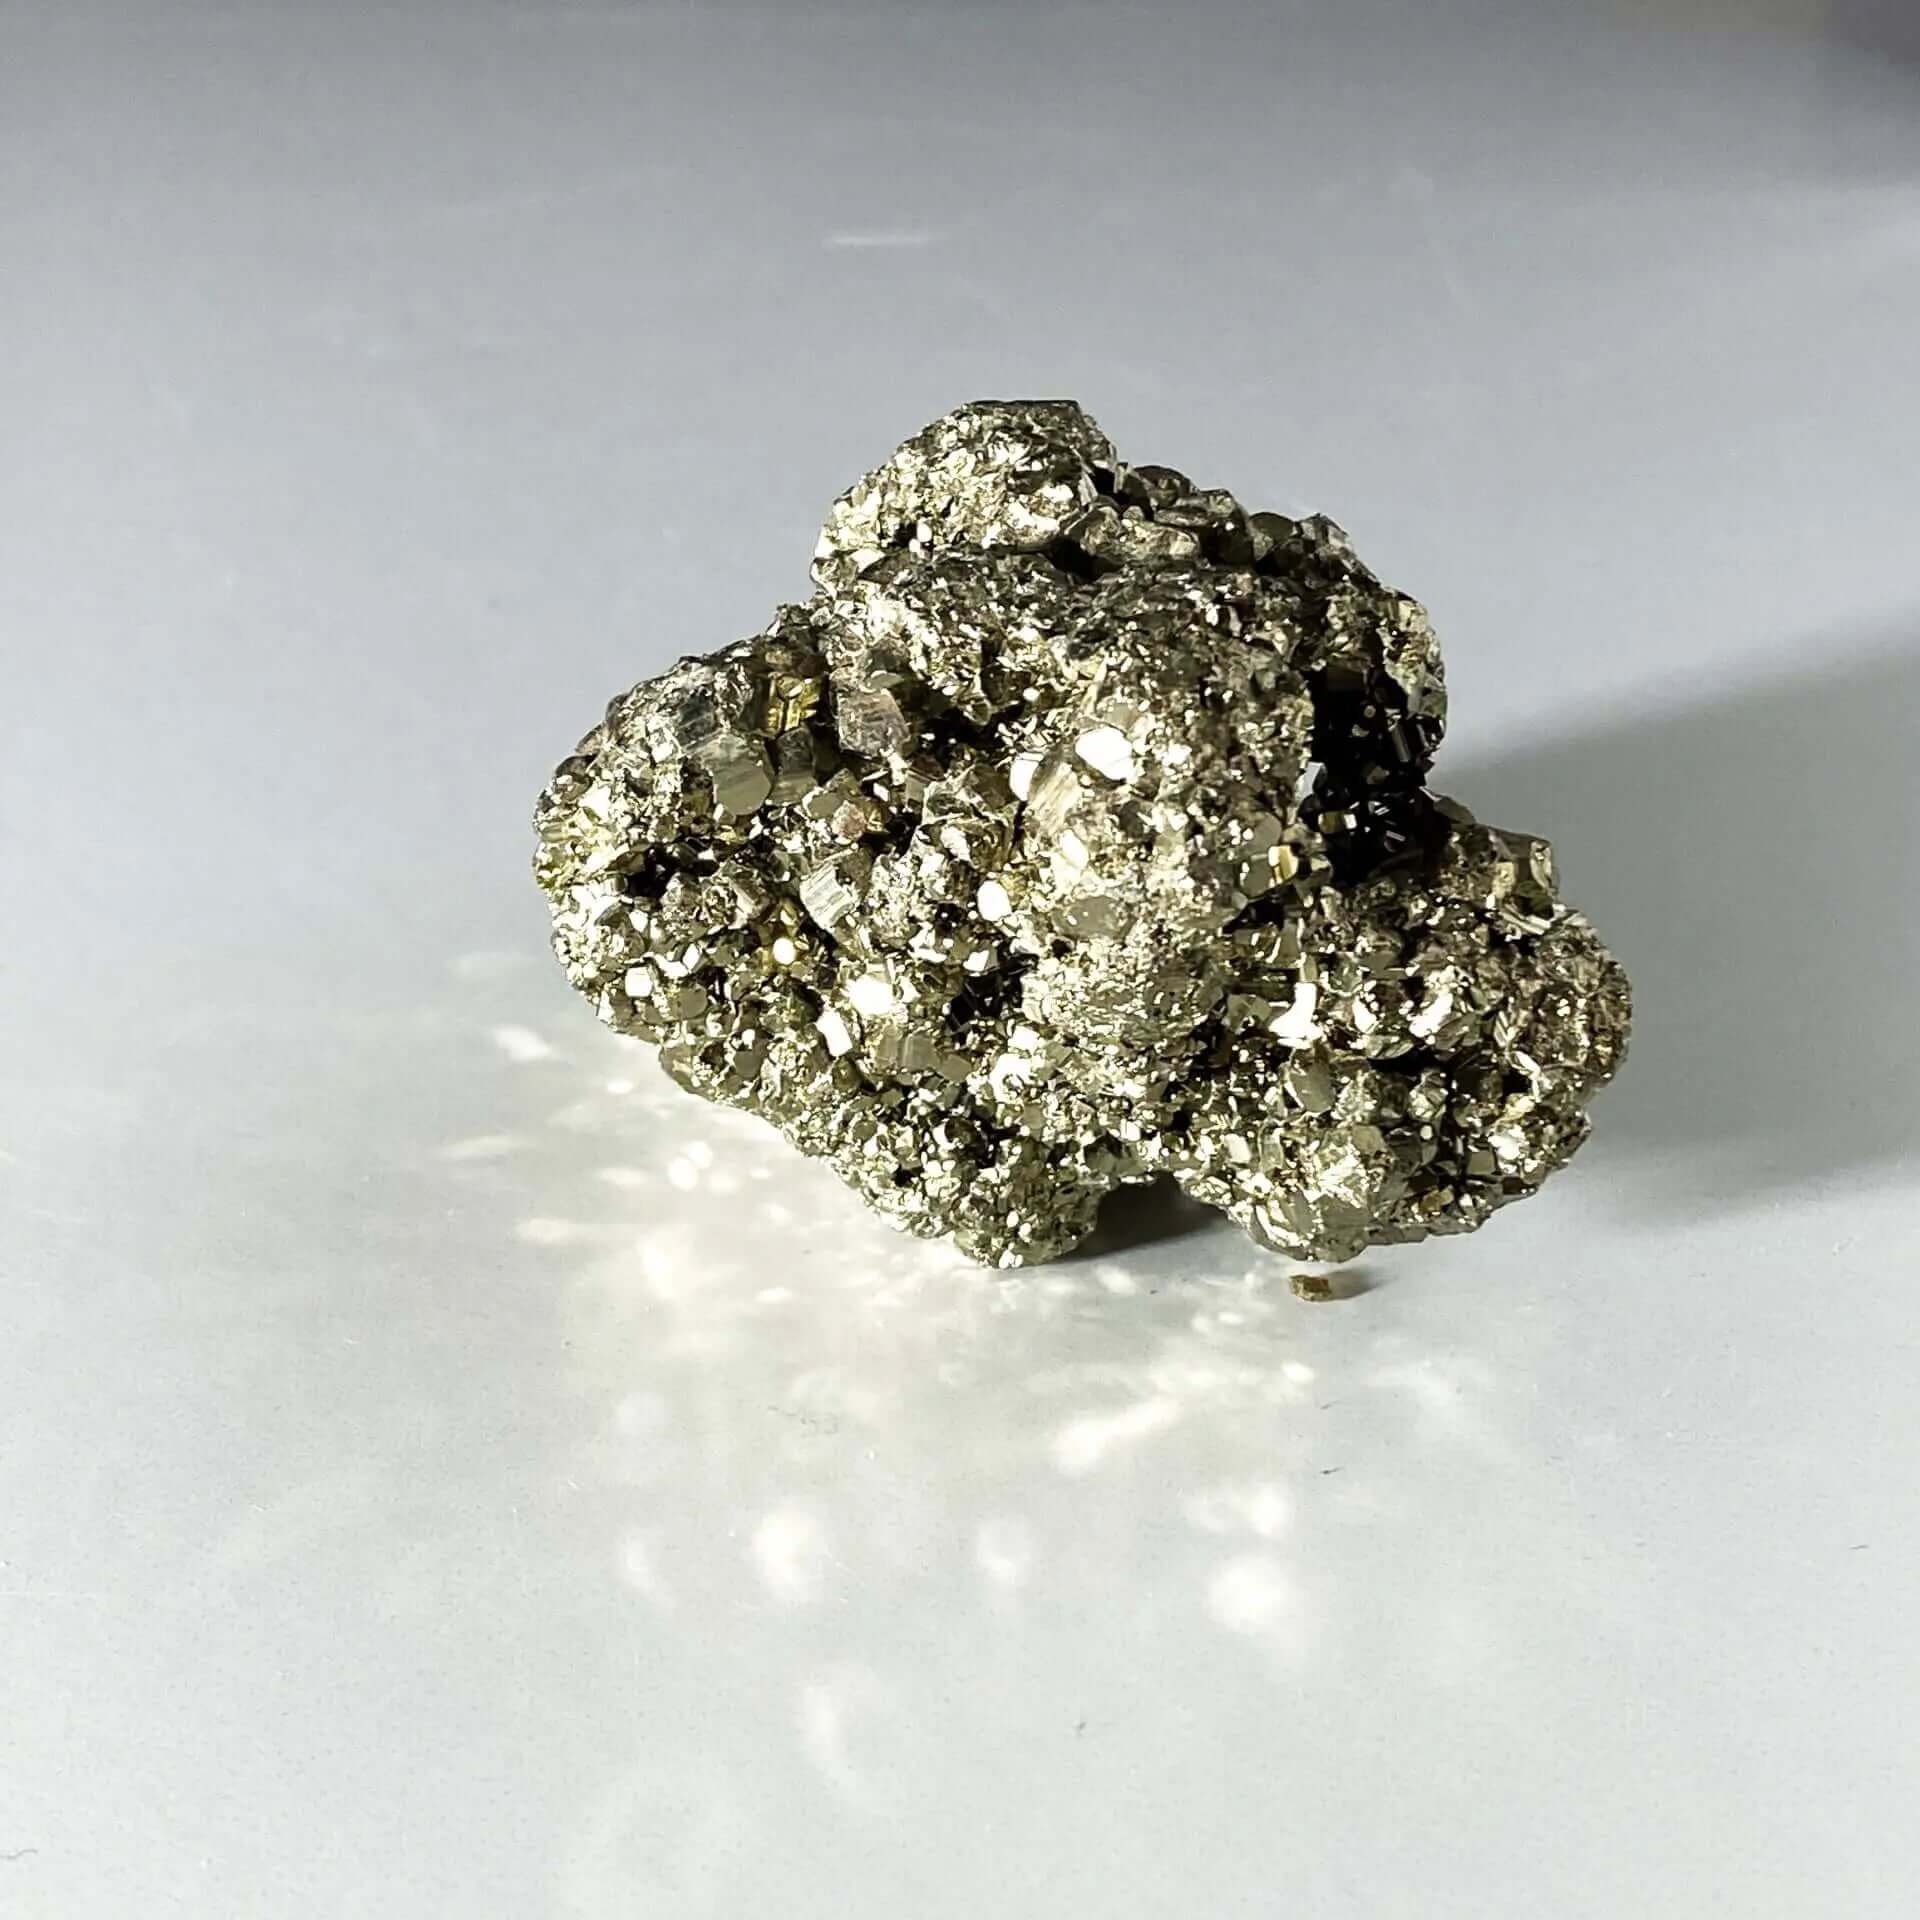 Pyrite on white background with dramatic shadow